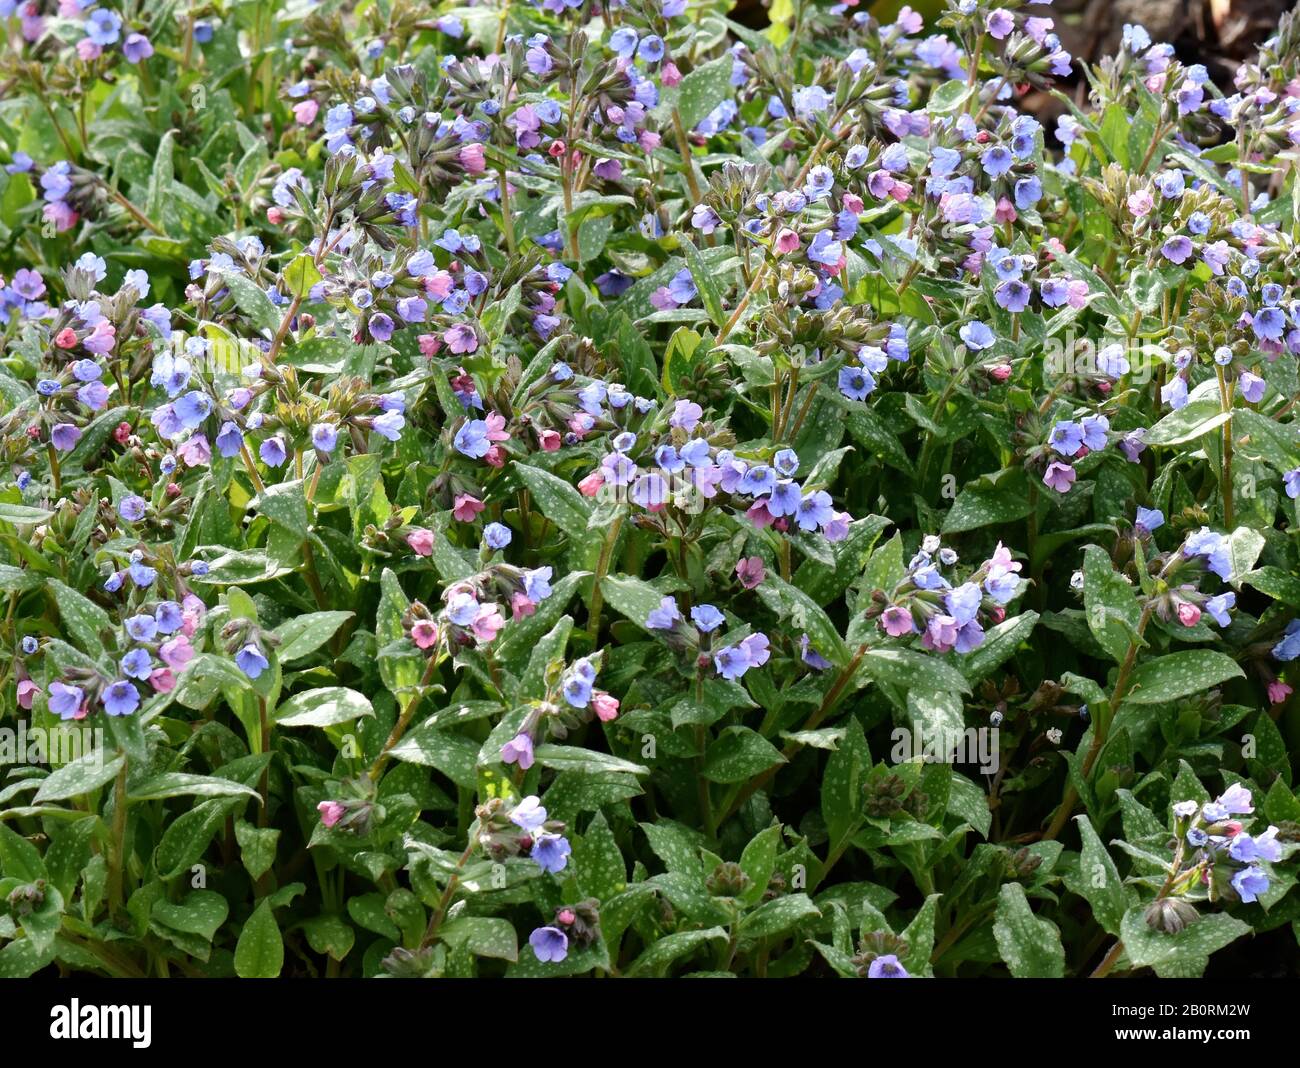 The Bethlehem lungwort Pulmonaria saccharata growing in a garden Stock Photo